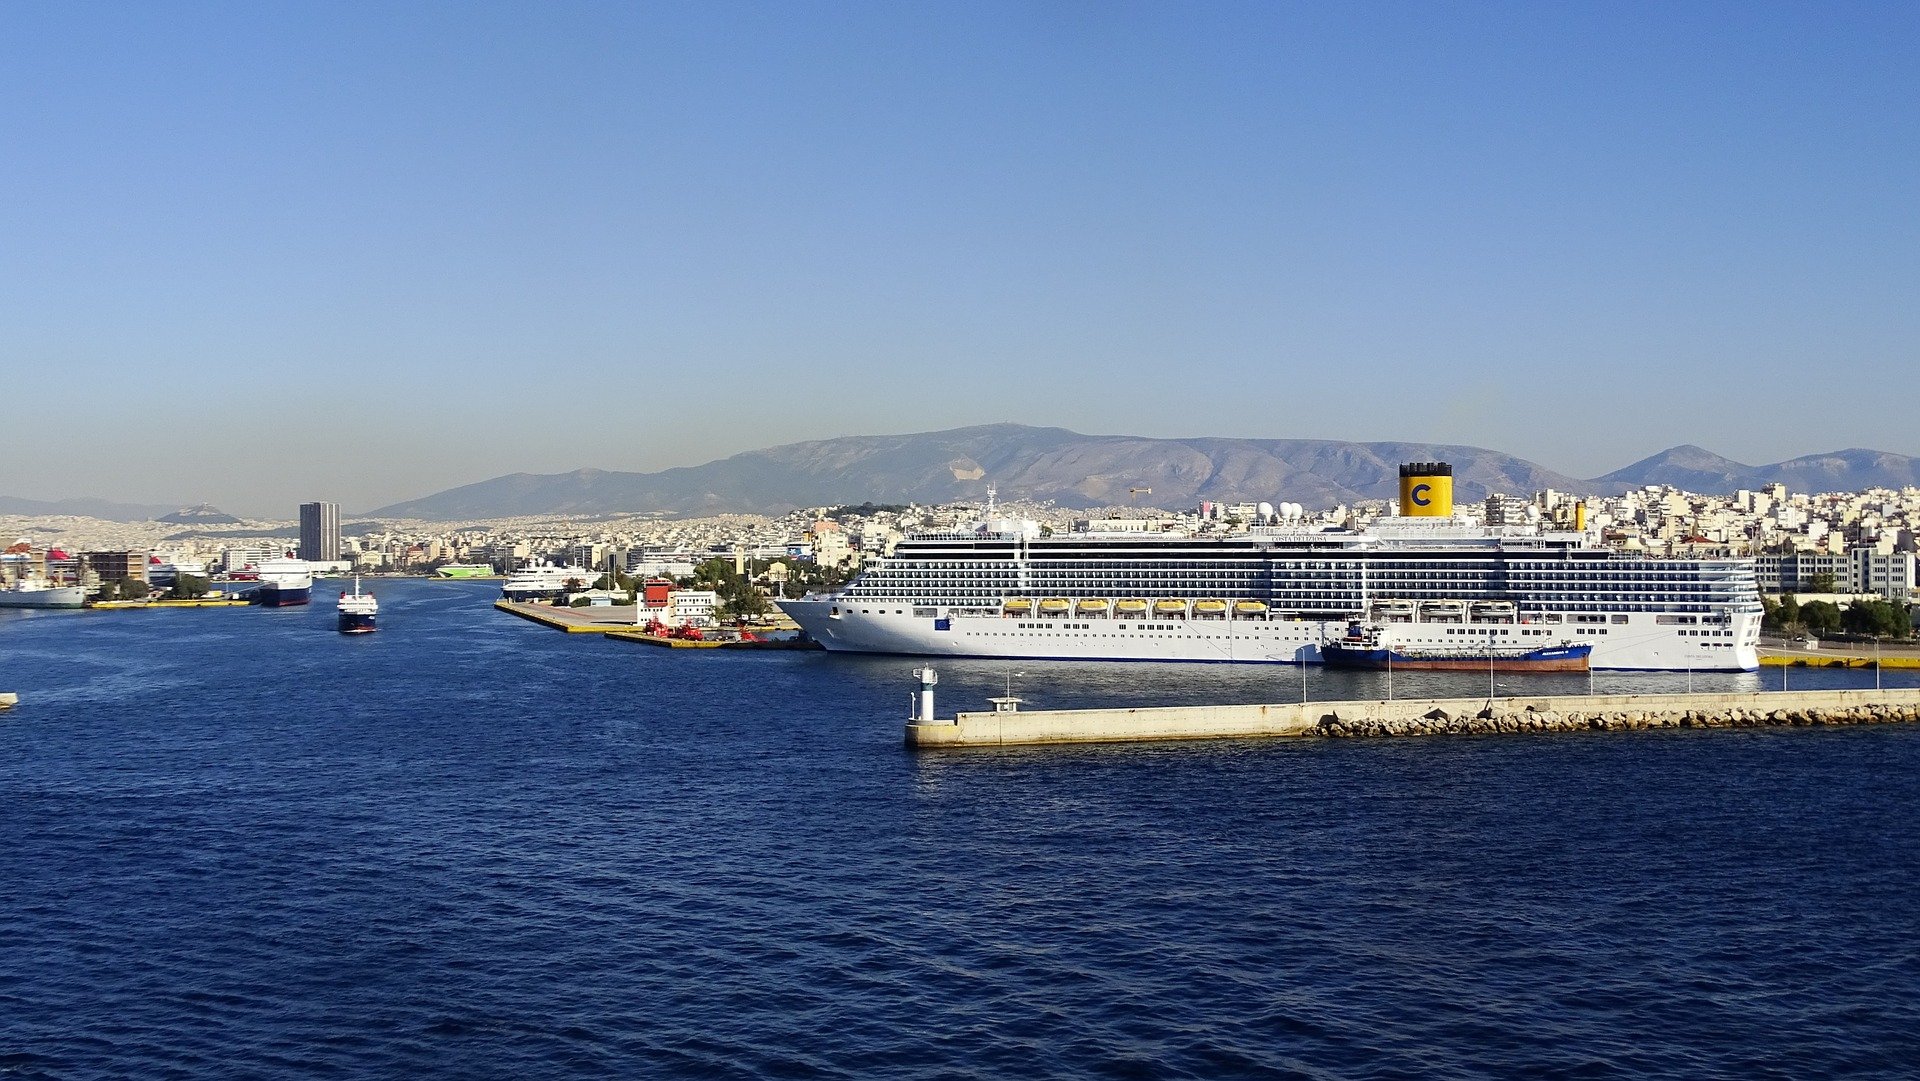 athens airport to piraeus, How To Get From Athens Airport To Piraeus